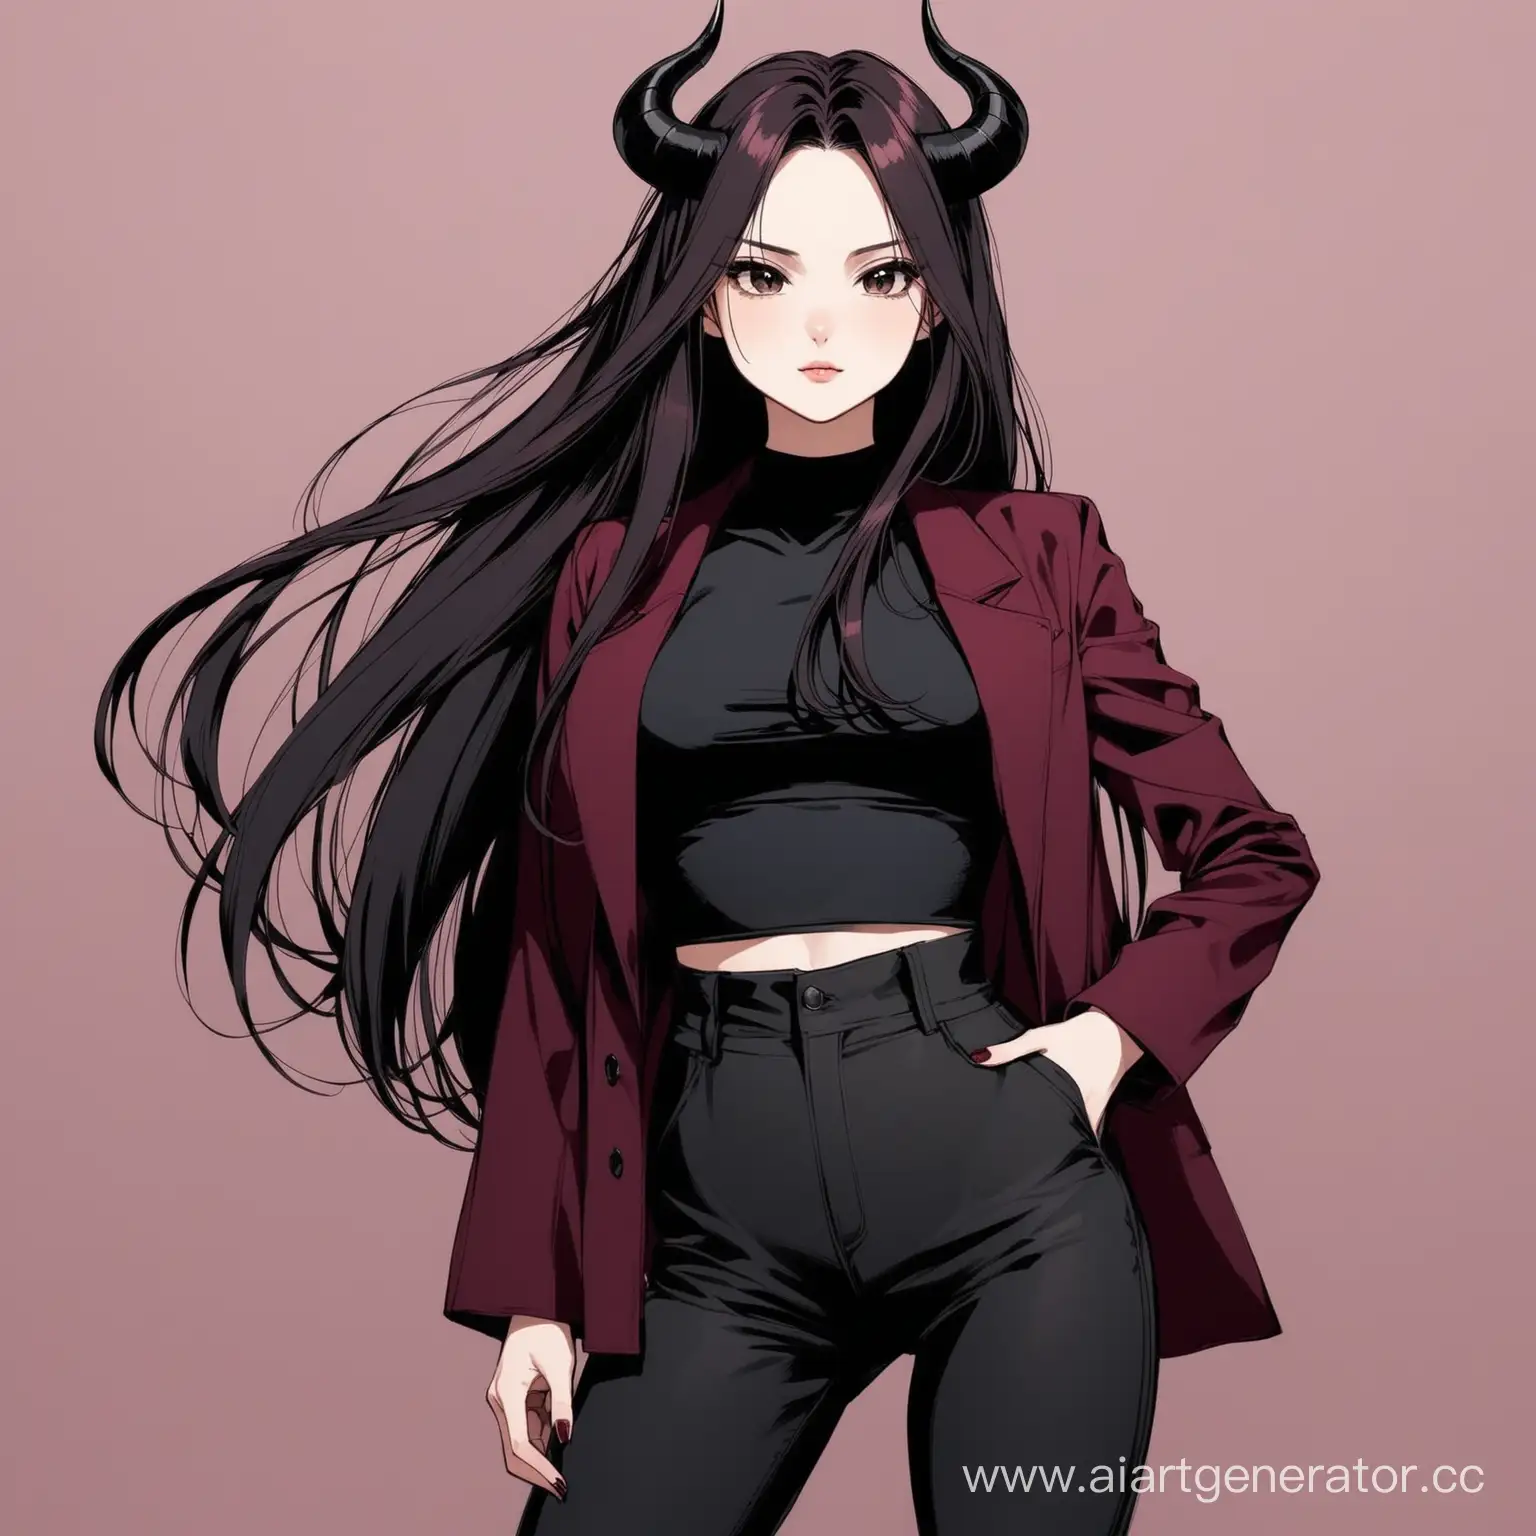 Mysterious-Girl-with-Long-Hair-and-Horns-in-Stylish-Attire